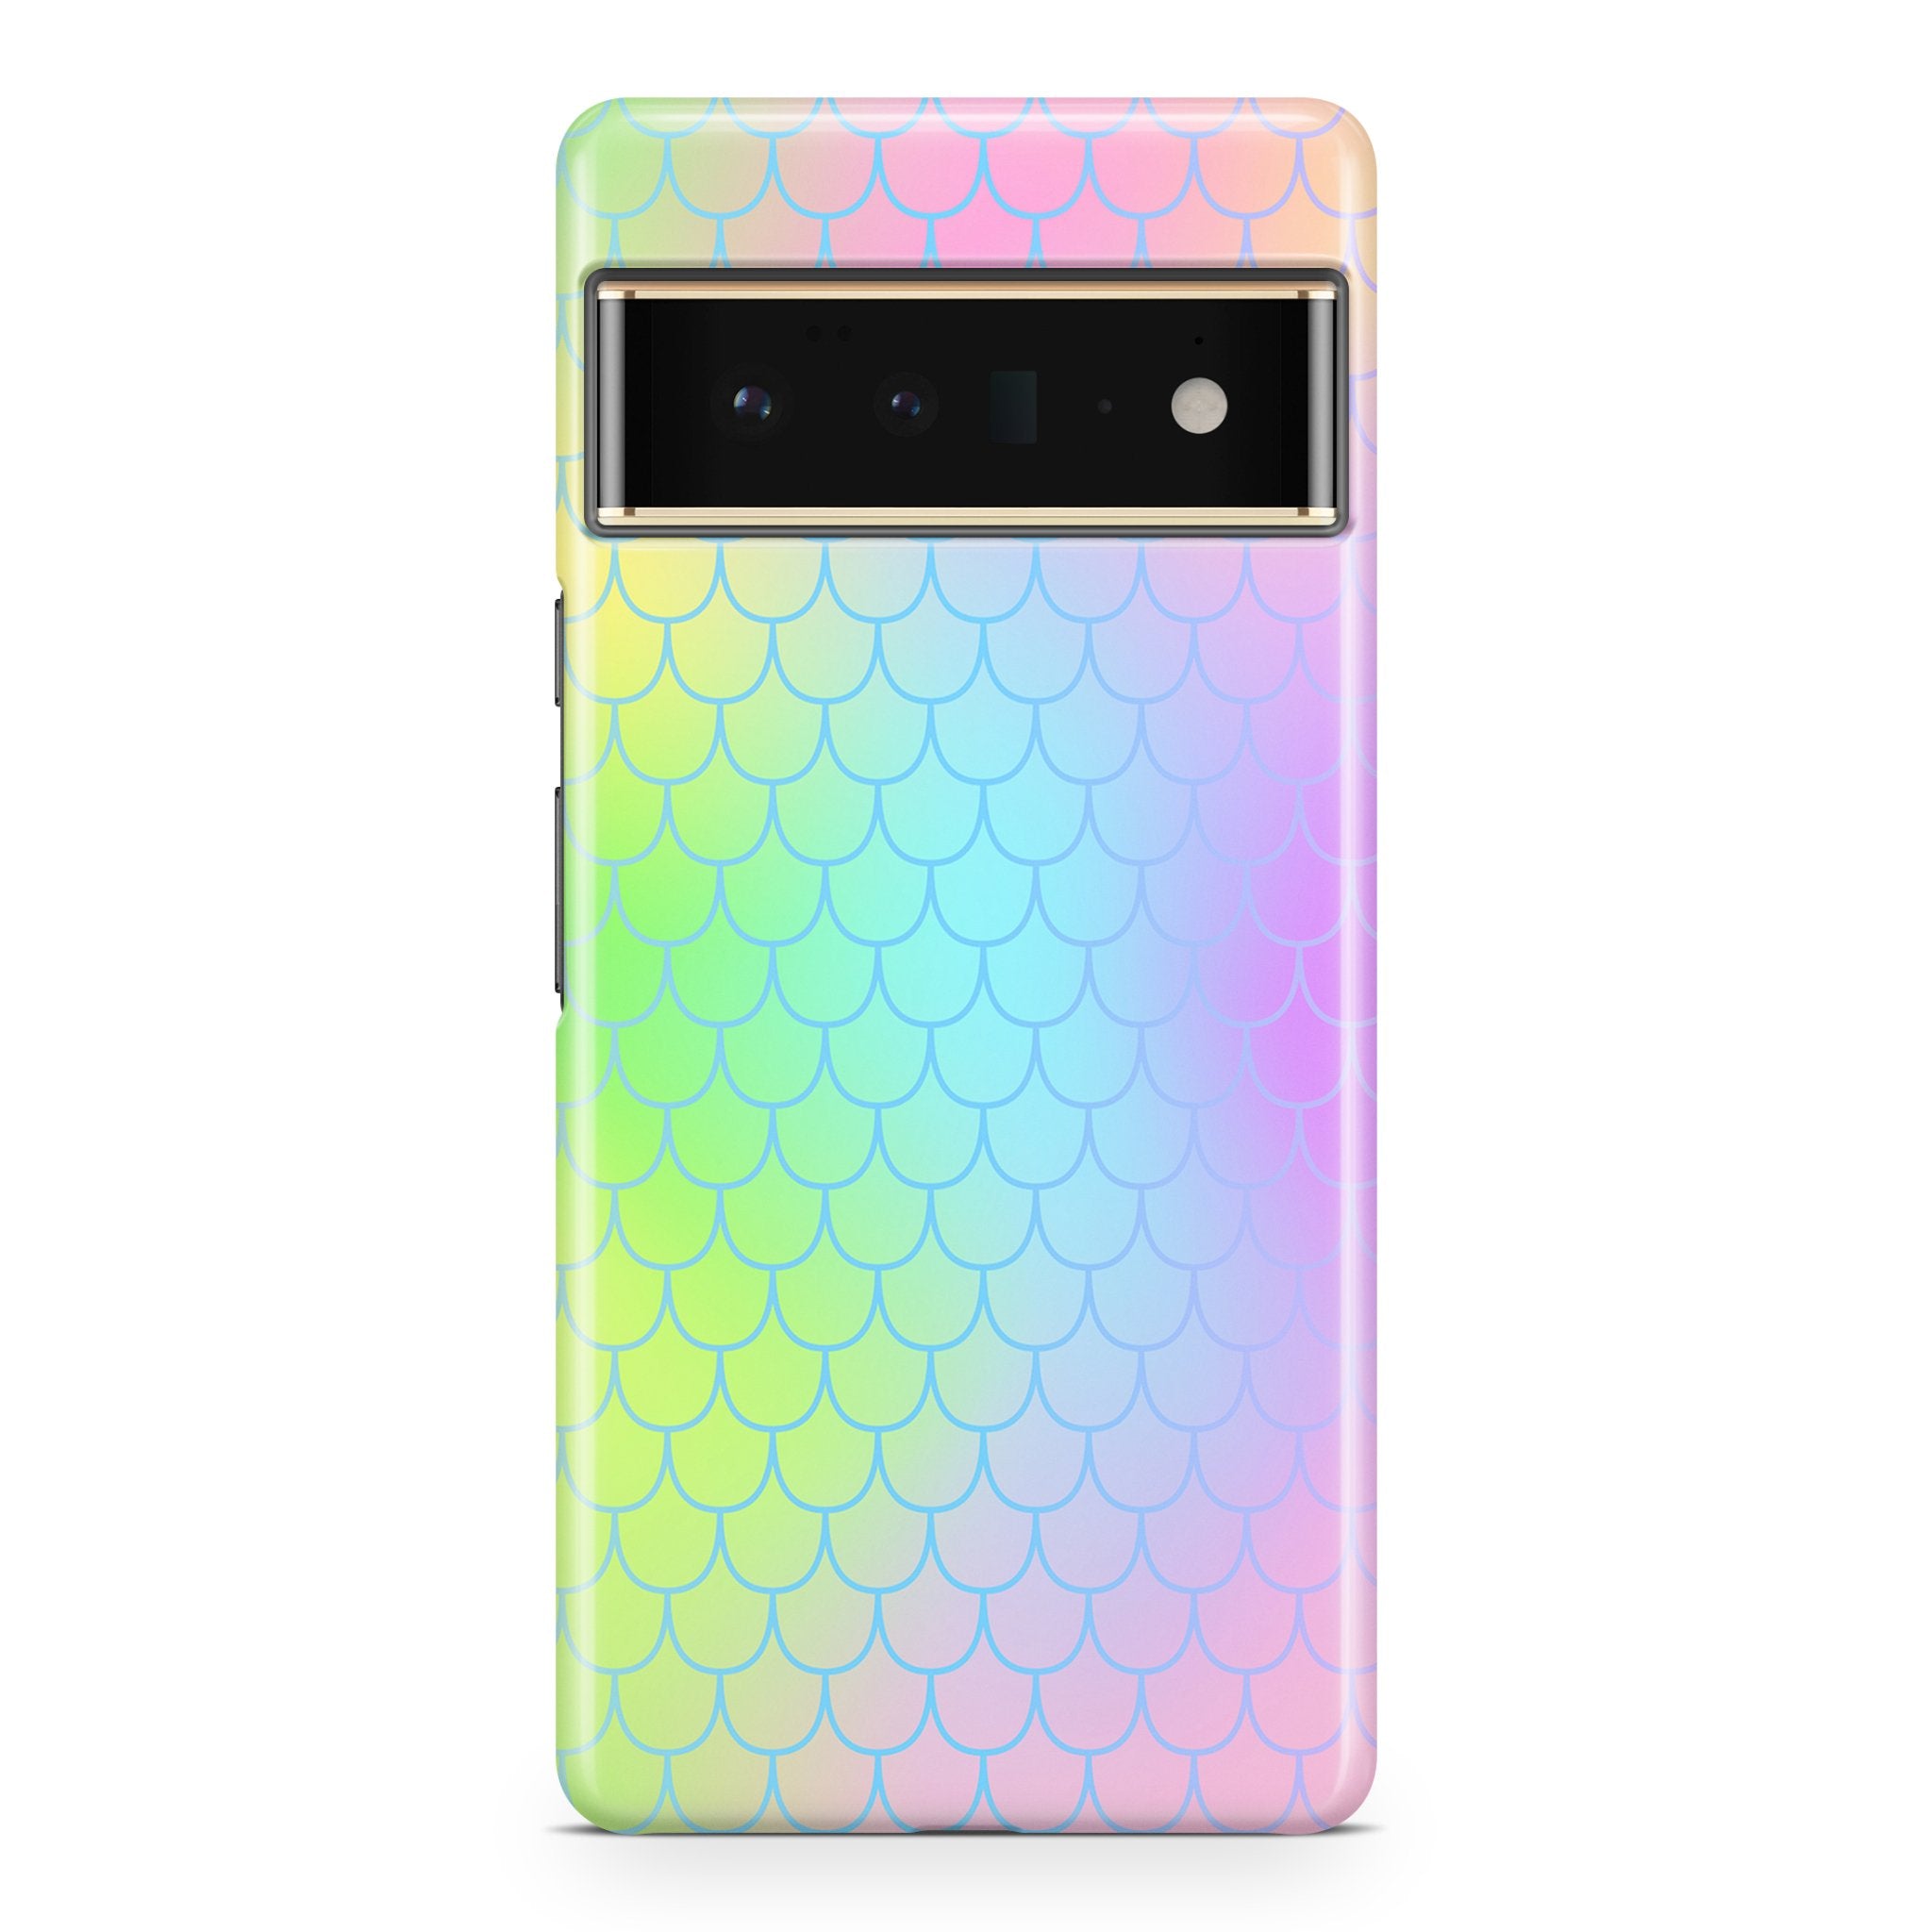 Unicorn Mermaid Scale - Google phone case designs by CaseSwagger